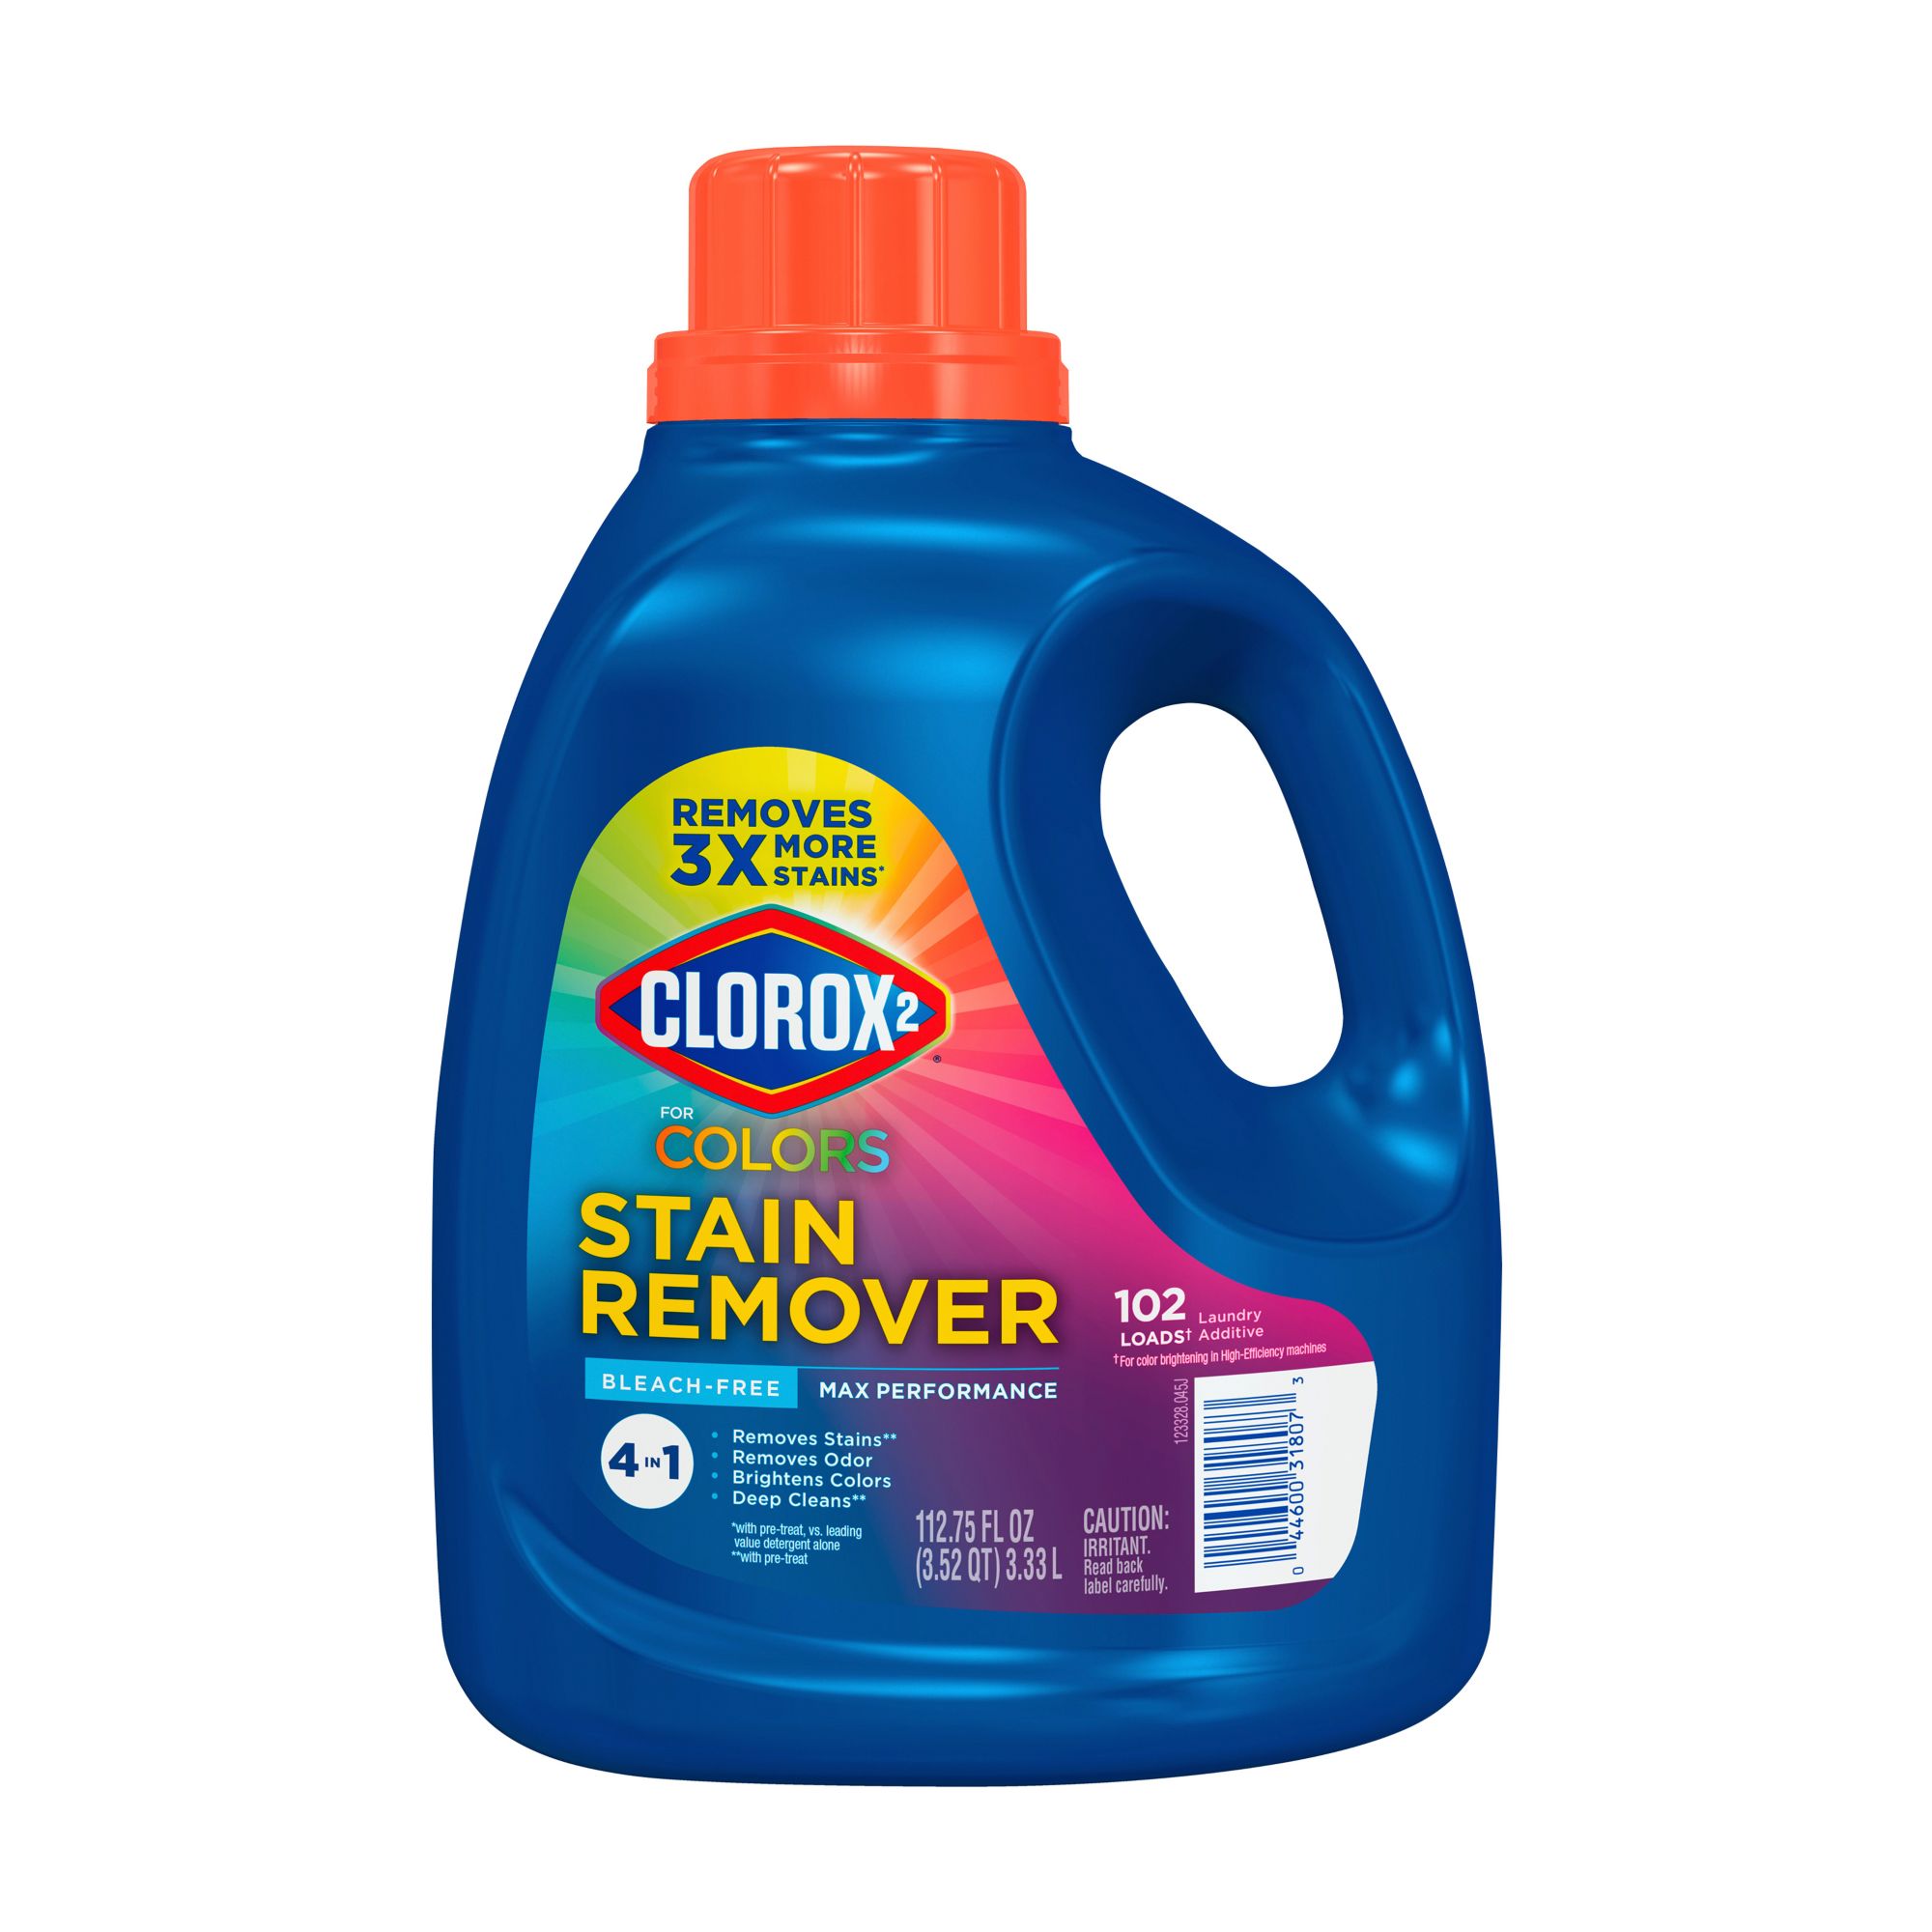 Save on Clorox 2 Stain Remover & Color Booster Liquid Free & Clear